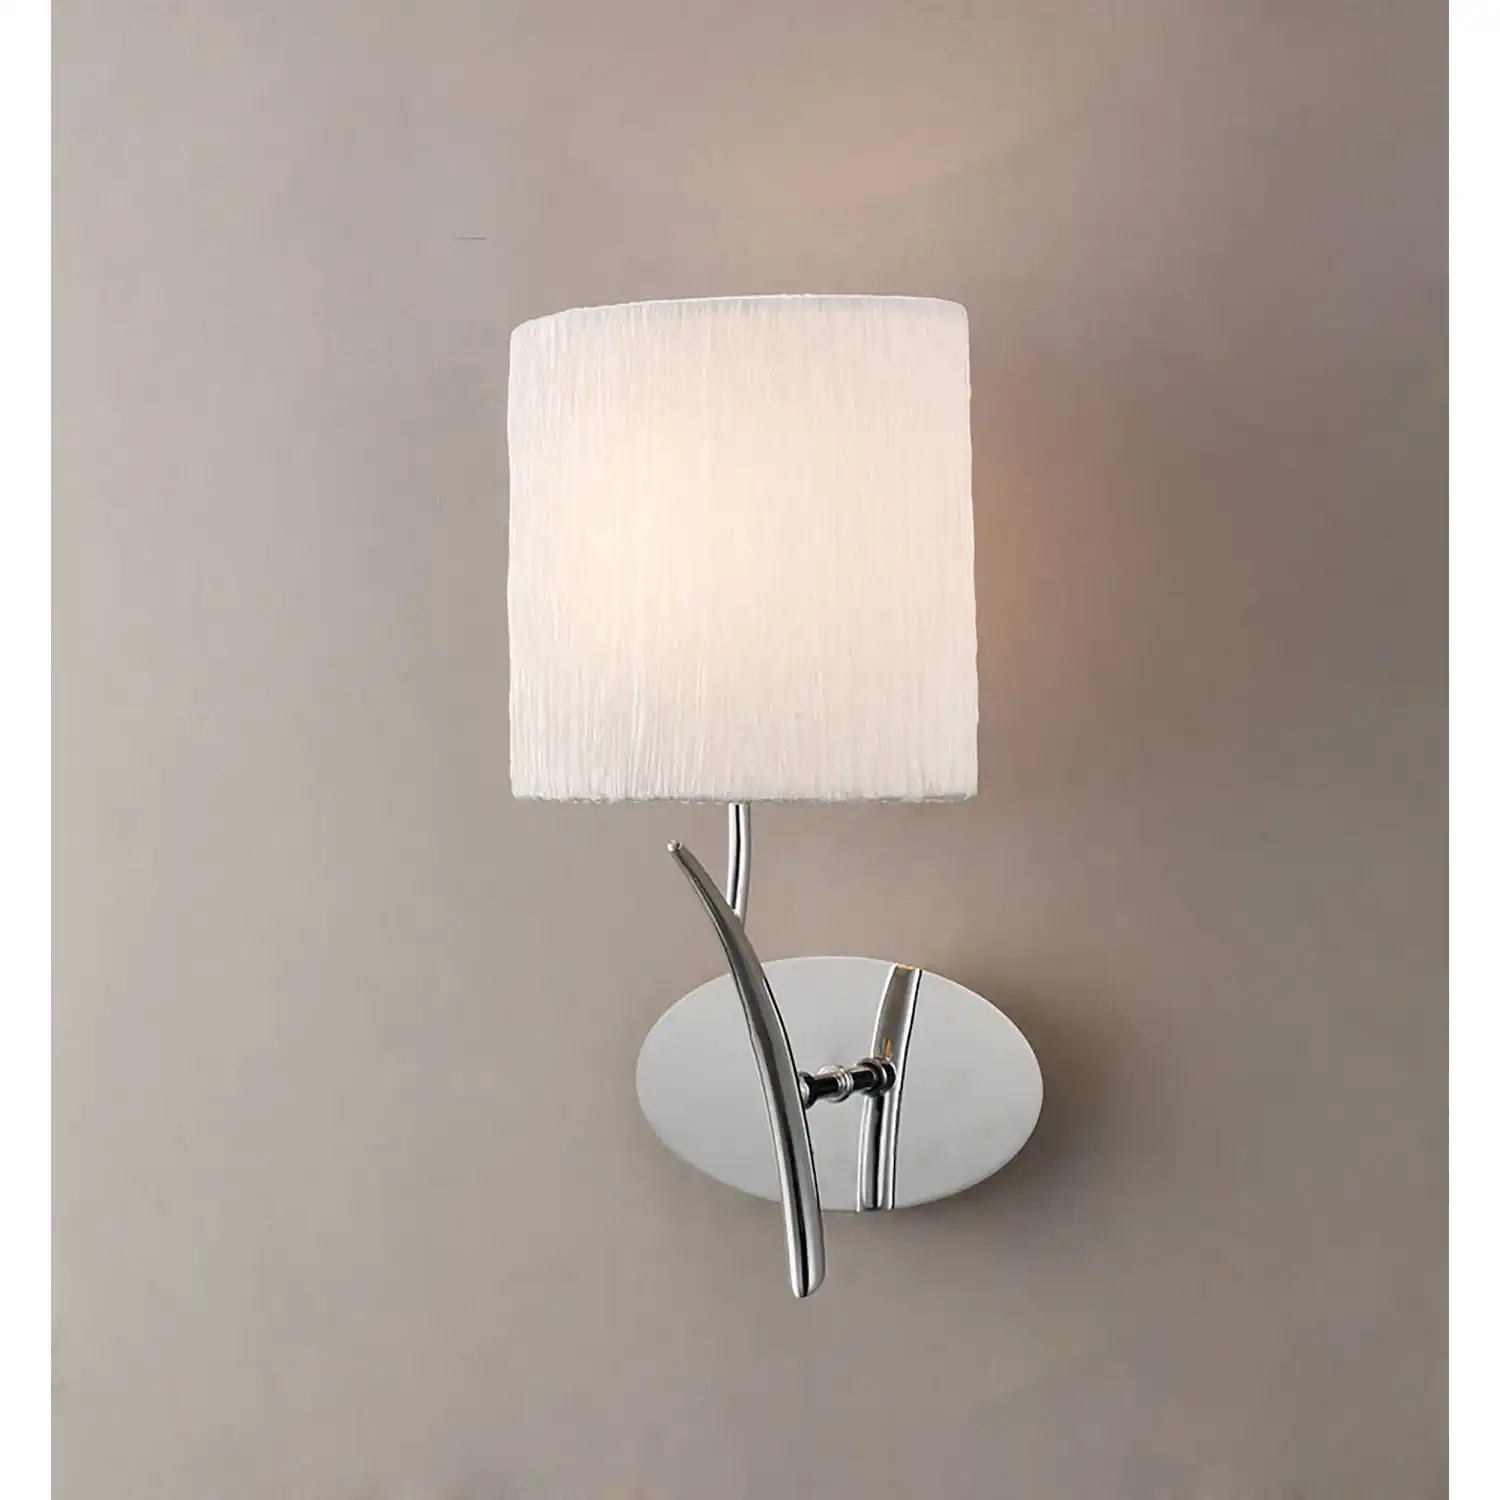 Eve Wall Lamp Switched 1 Light E27, Polished Chrome With White Oval Shade